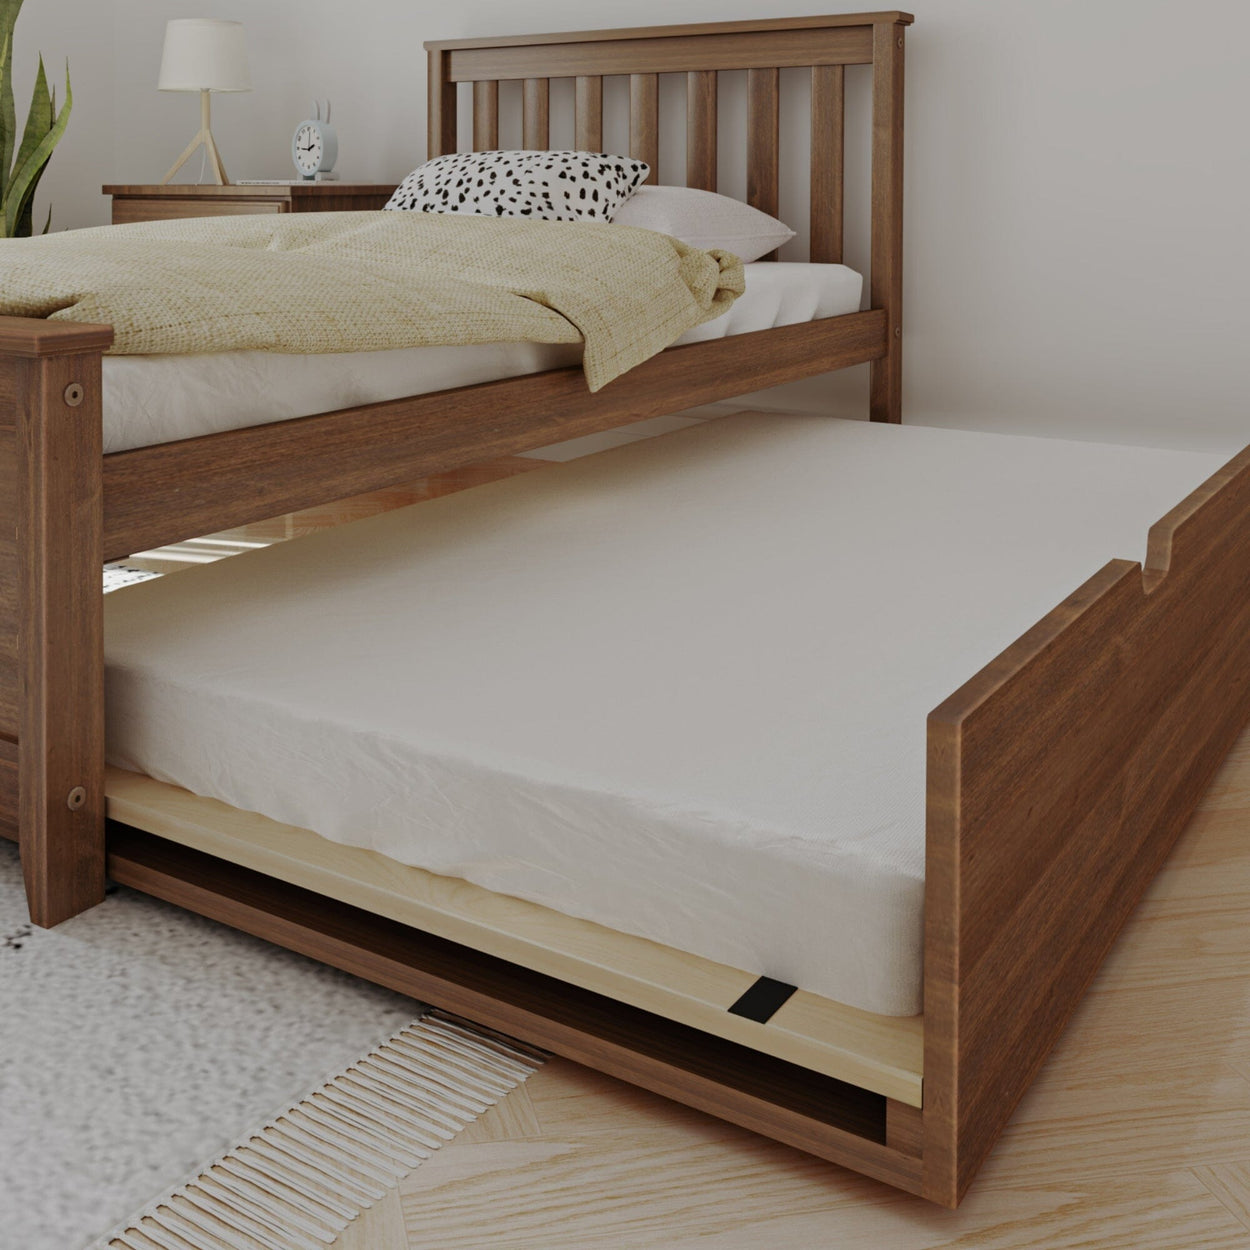 186210-008 : Kids Beds Classic Twin-Size Platform Bed with Trundle, Walnut